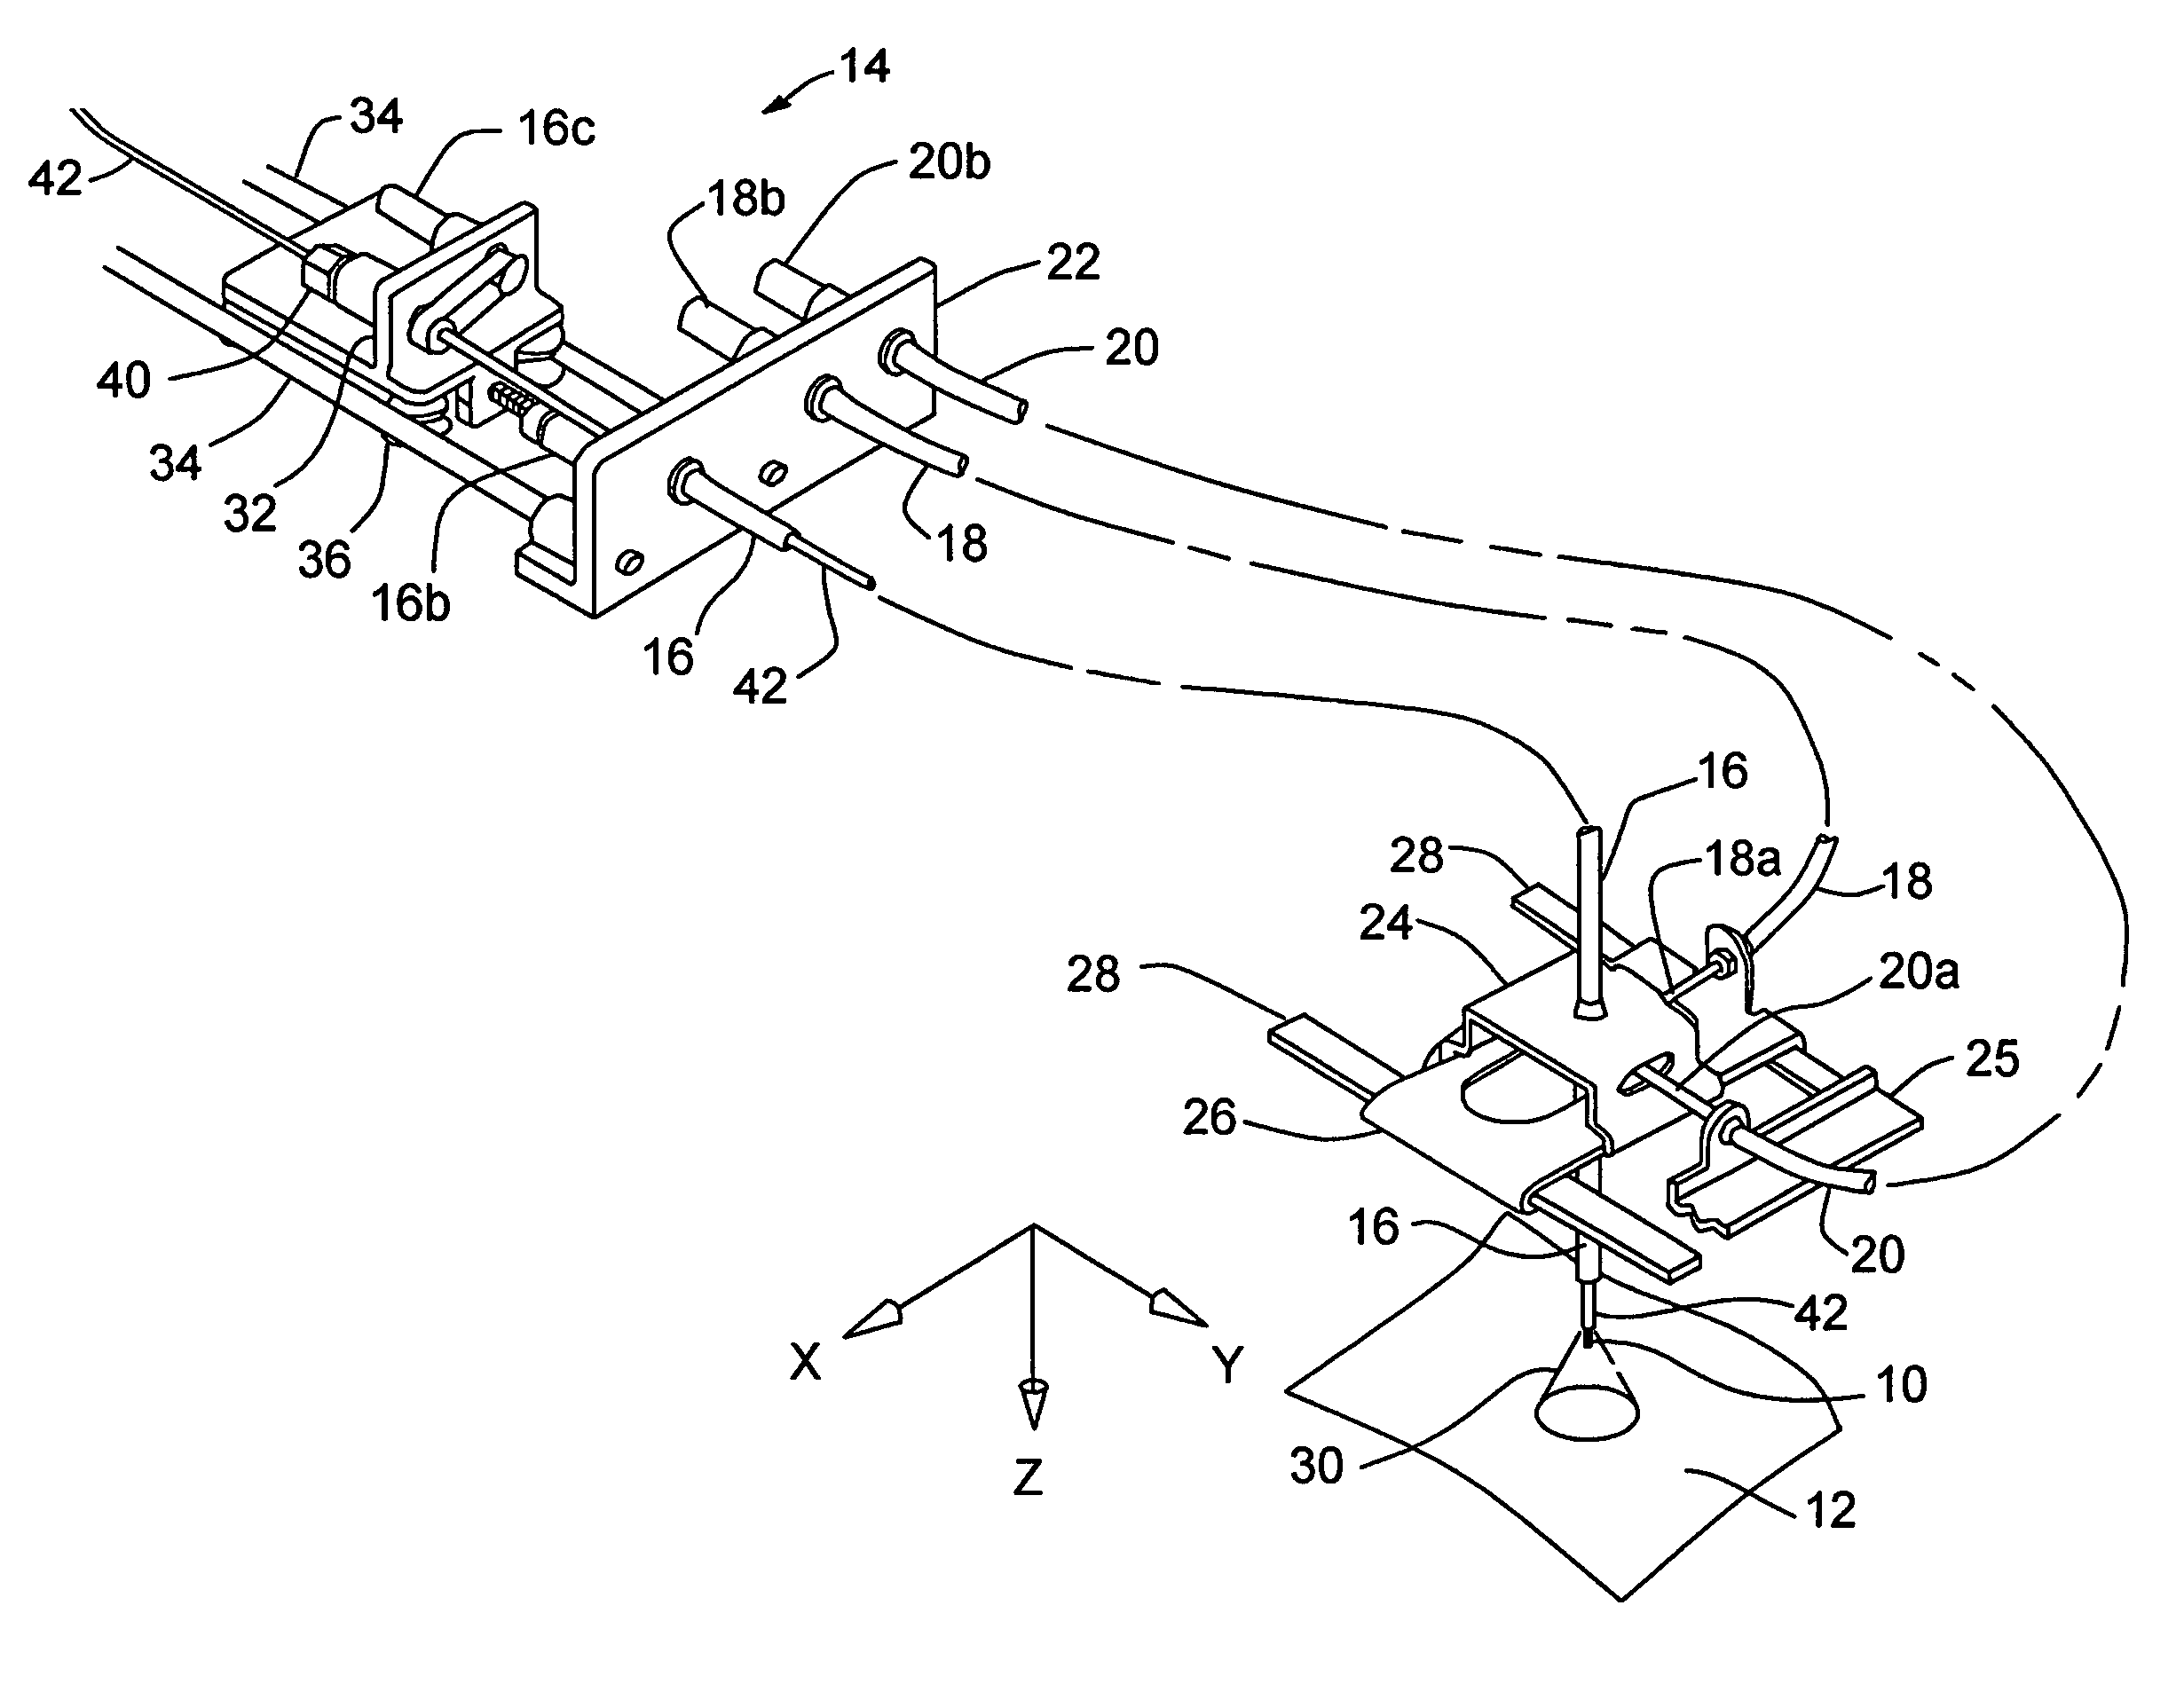 Apparatus and methods for radiation treatment of tissue surfaces